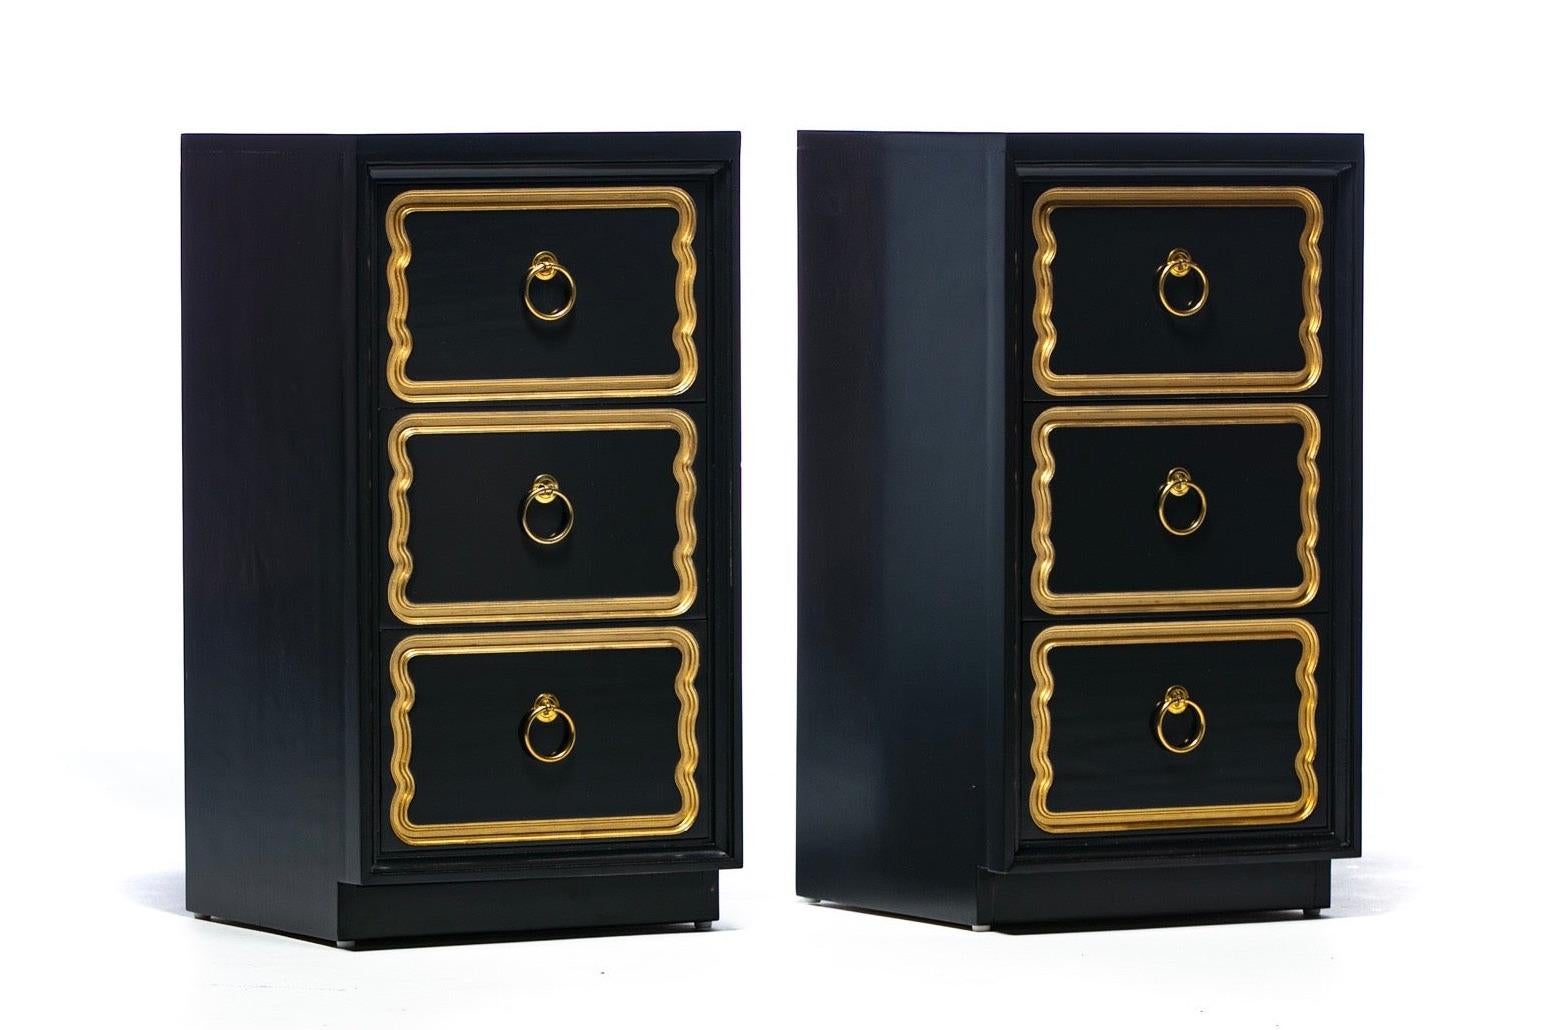 Designers and Hollywood Regency enthusiasts will immediately recognize the iconic Dorothy Draper España Chest drawer fronts on this pair of custom nightstands lacquered in the same original color combination as Dorothy Draper's 1950s España Chests.